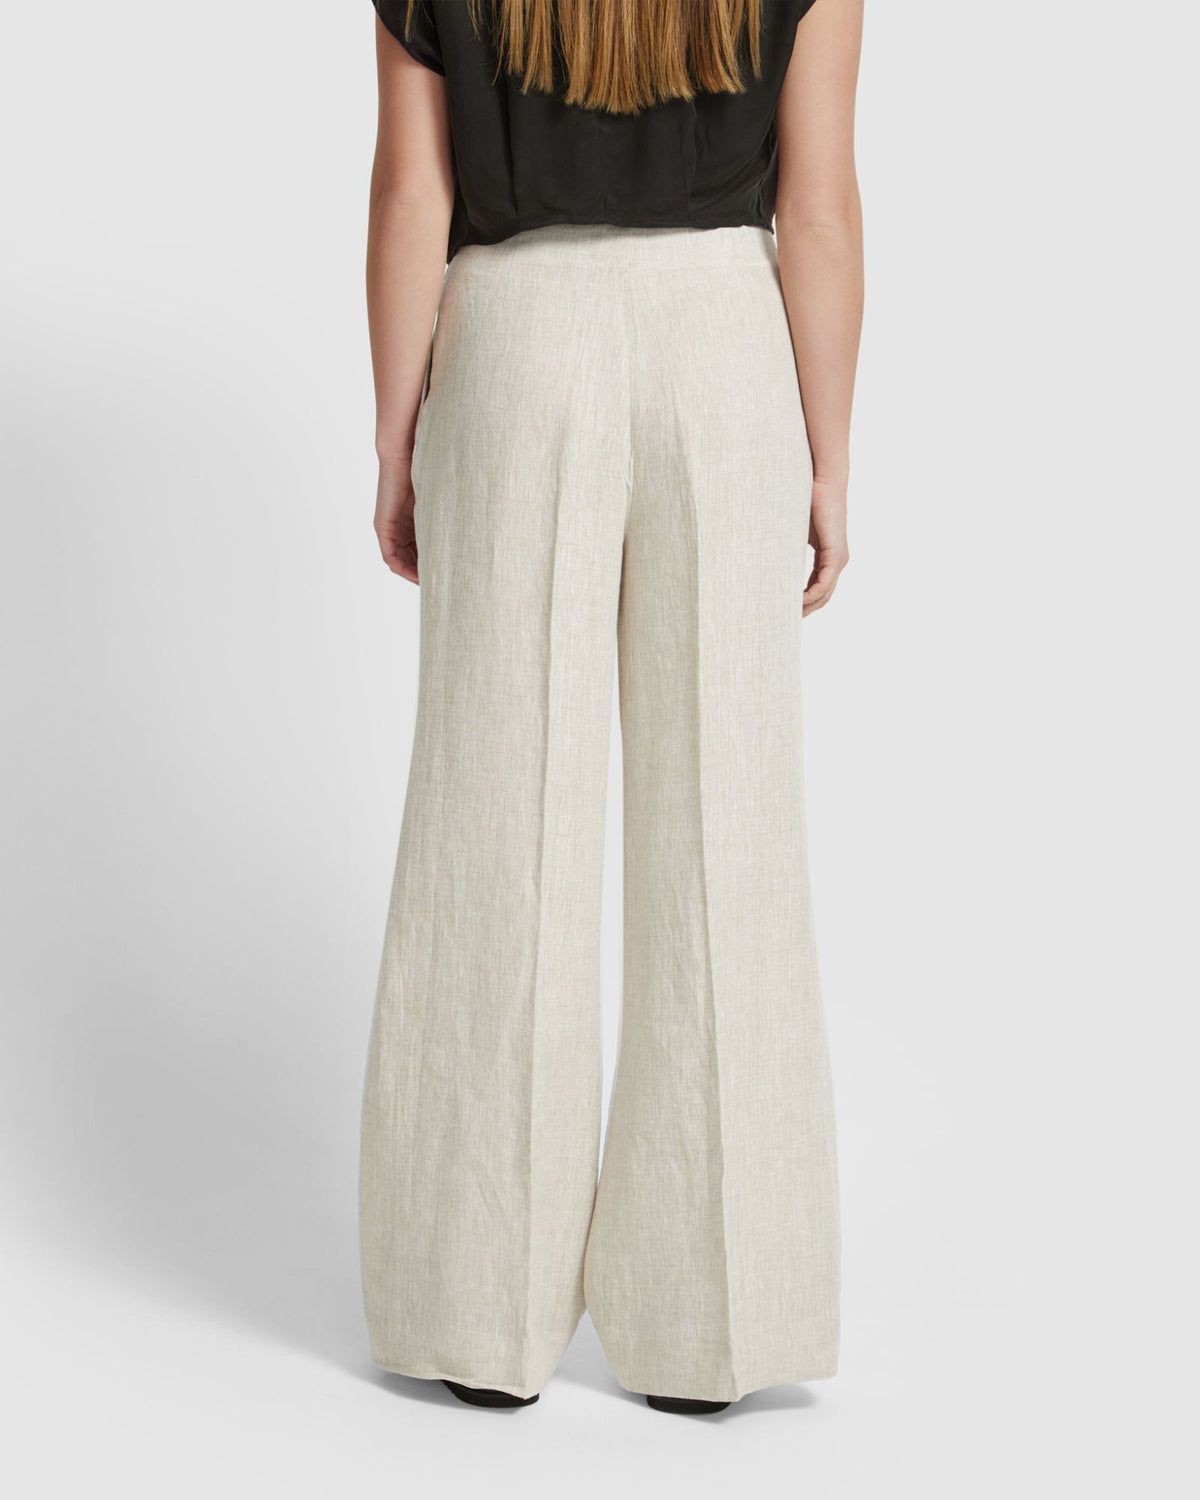 Linen PALAZZO Pants, 28, 30, 32, 34 Inches Inseam Options, Wide